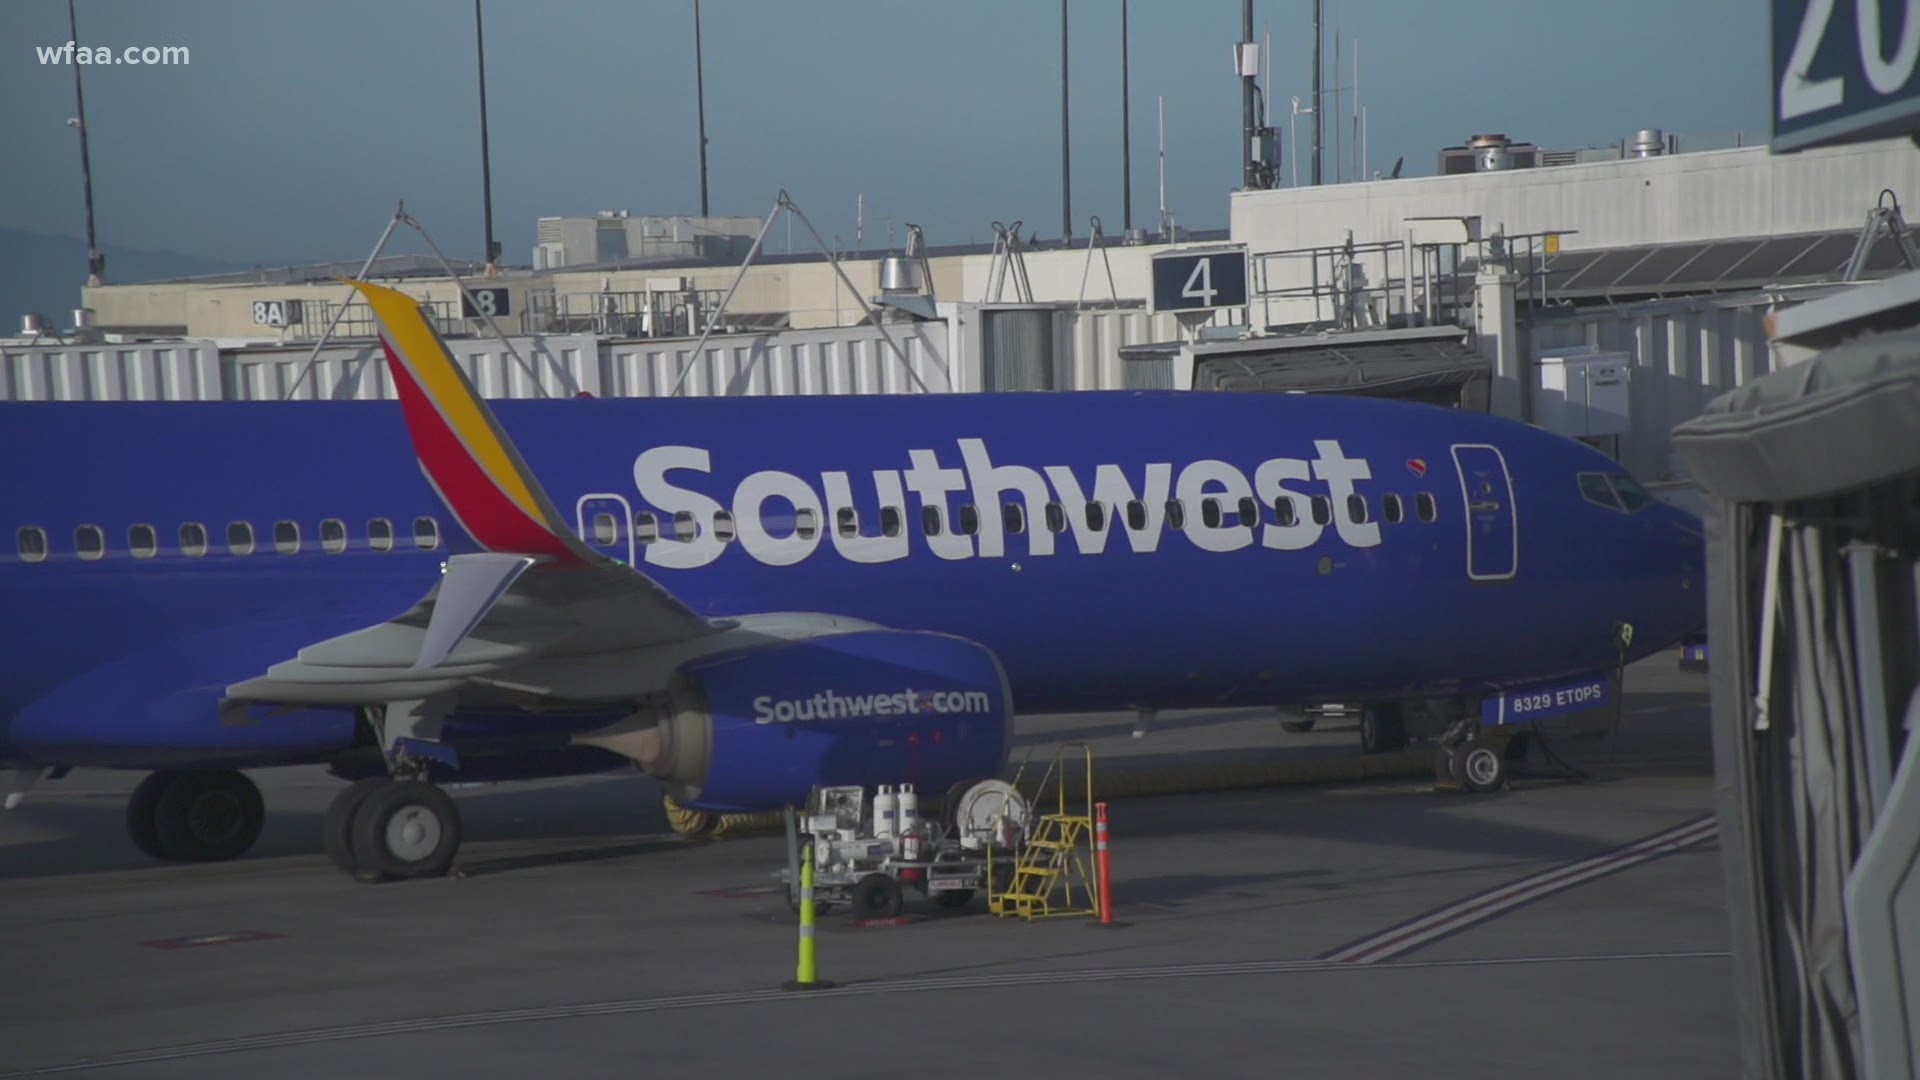 Southwest Airlines is starting weekend flights to Steamboat and Telluride from Dallas Love Field.